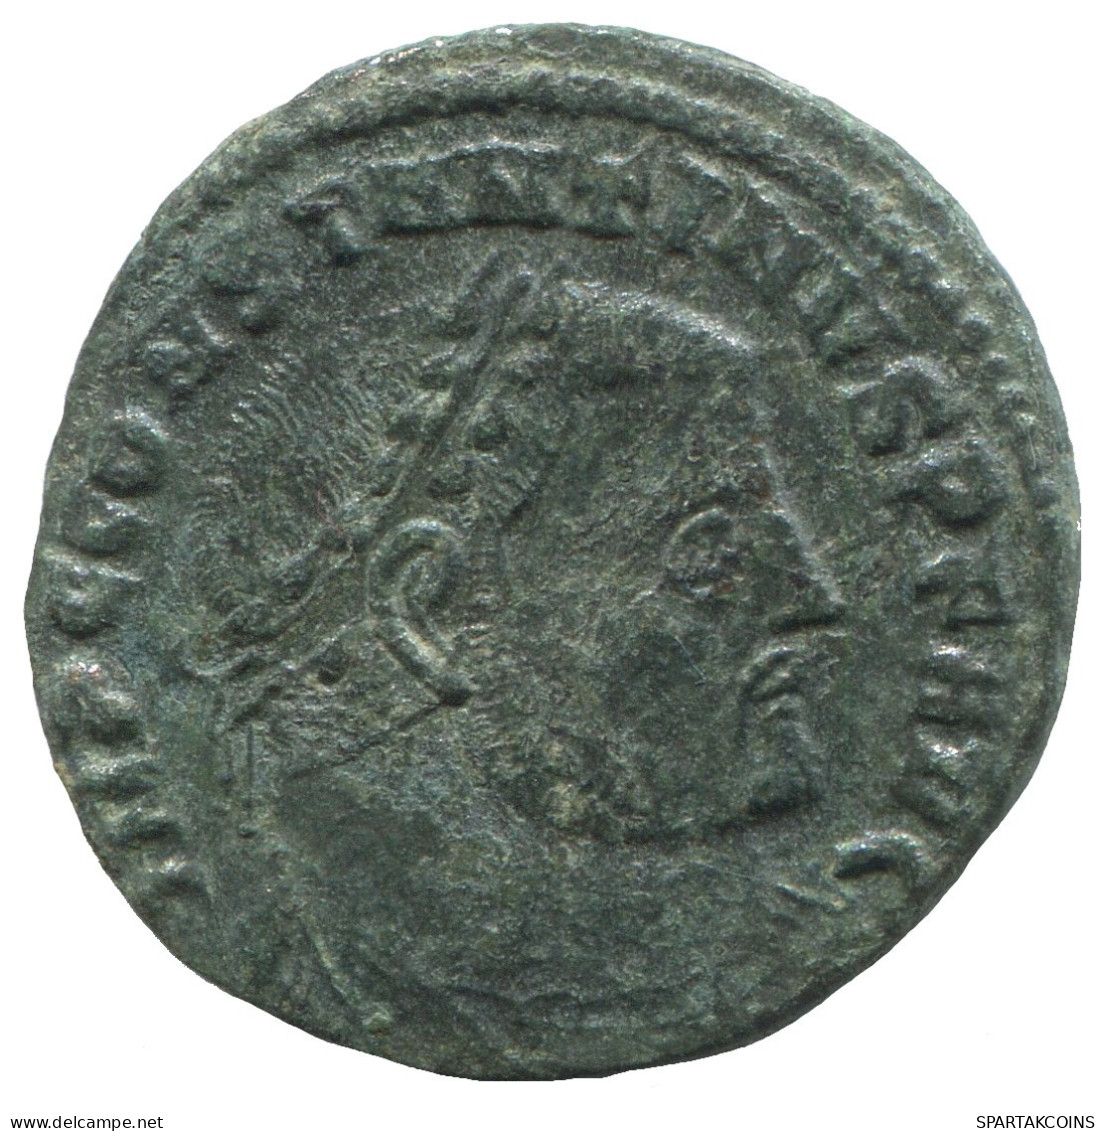 CONSTANTINE I (THE GREAT) Antioch J ϵ Jupiter&Victory 3.7g/24mm #SAV1055.9.E.A - The Christian Empire (307 AD To 363 AD)